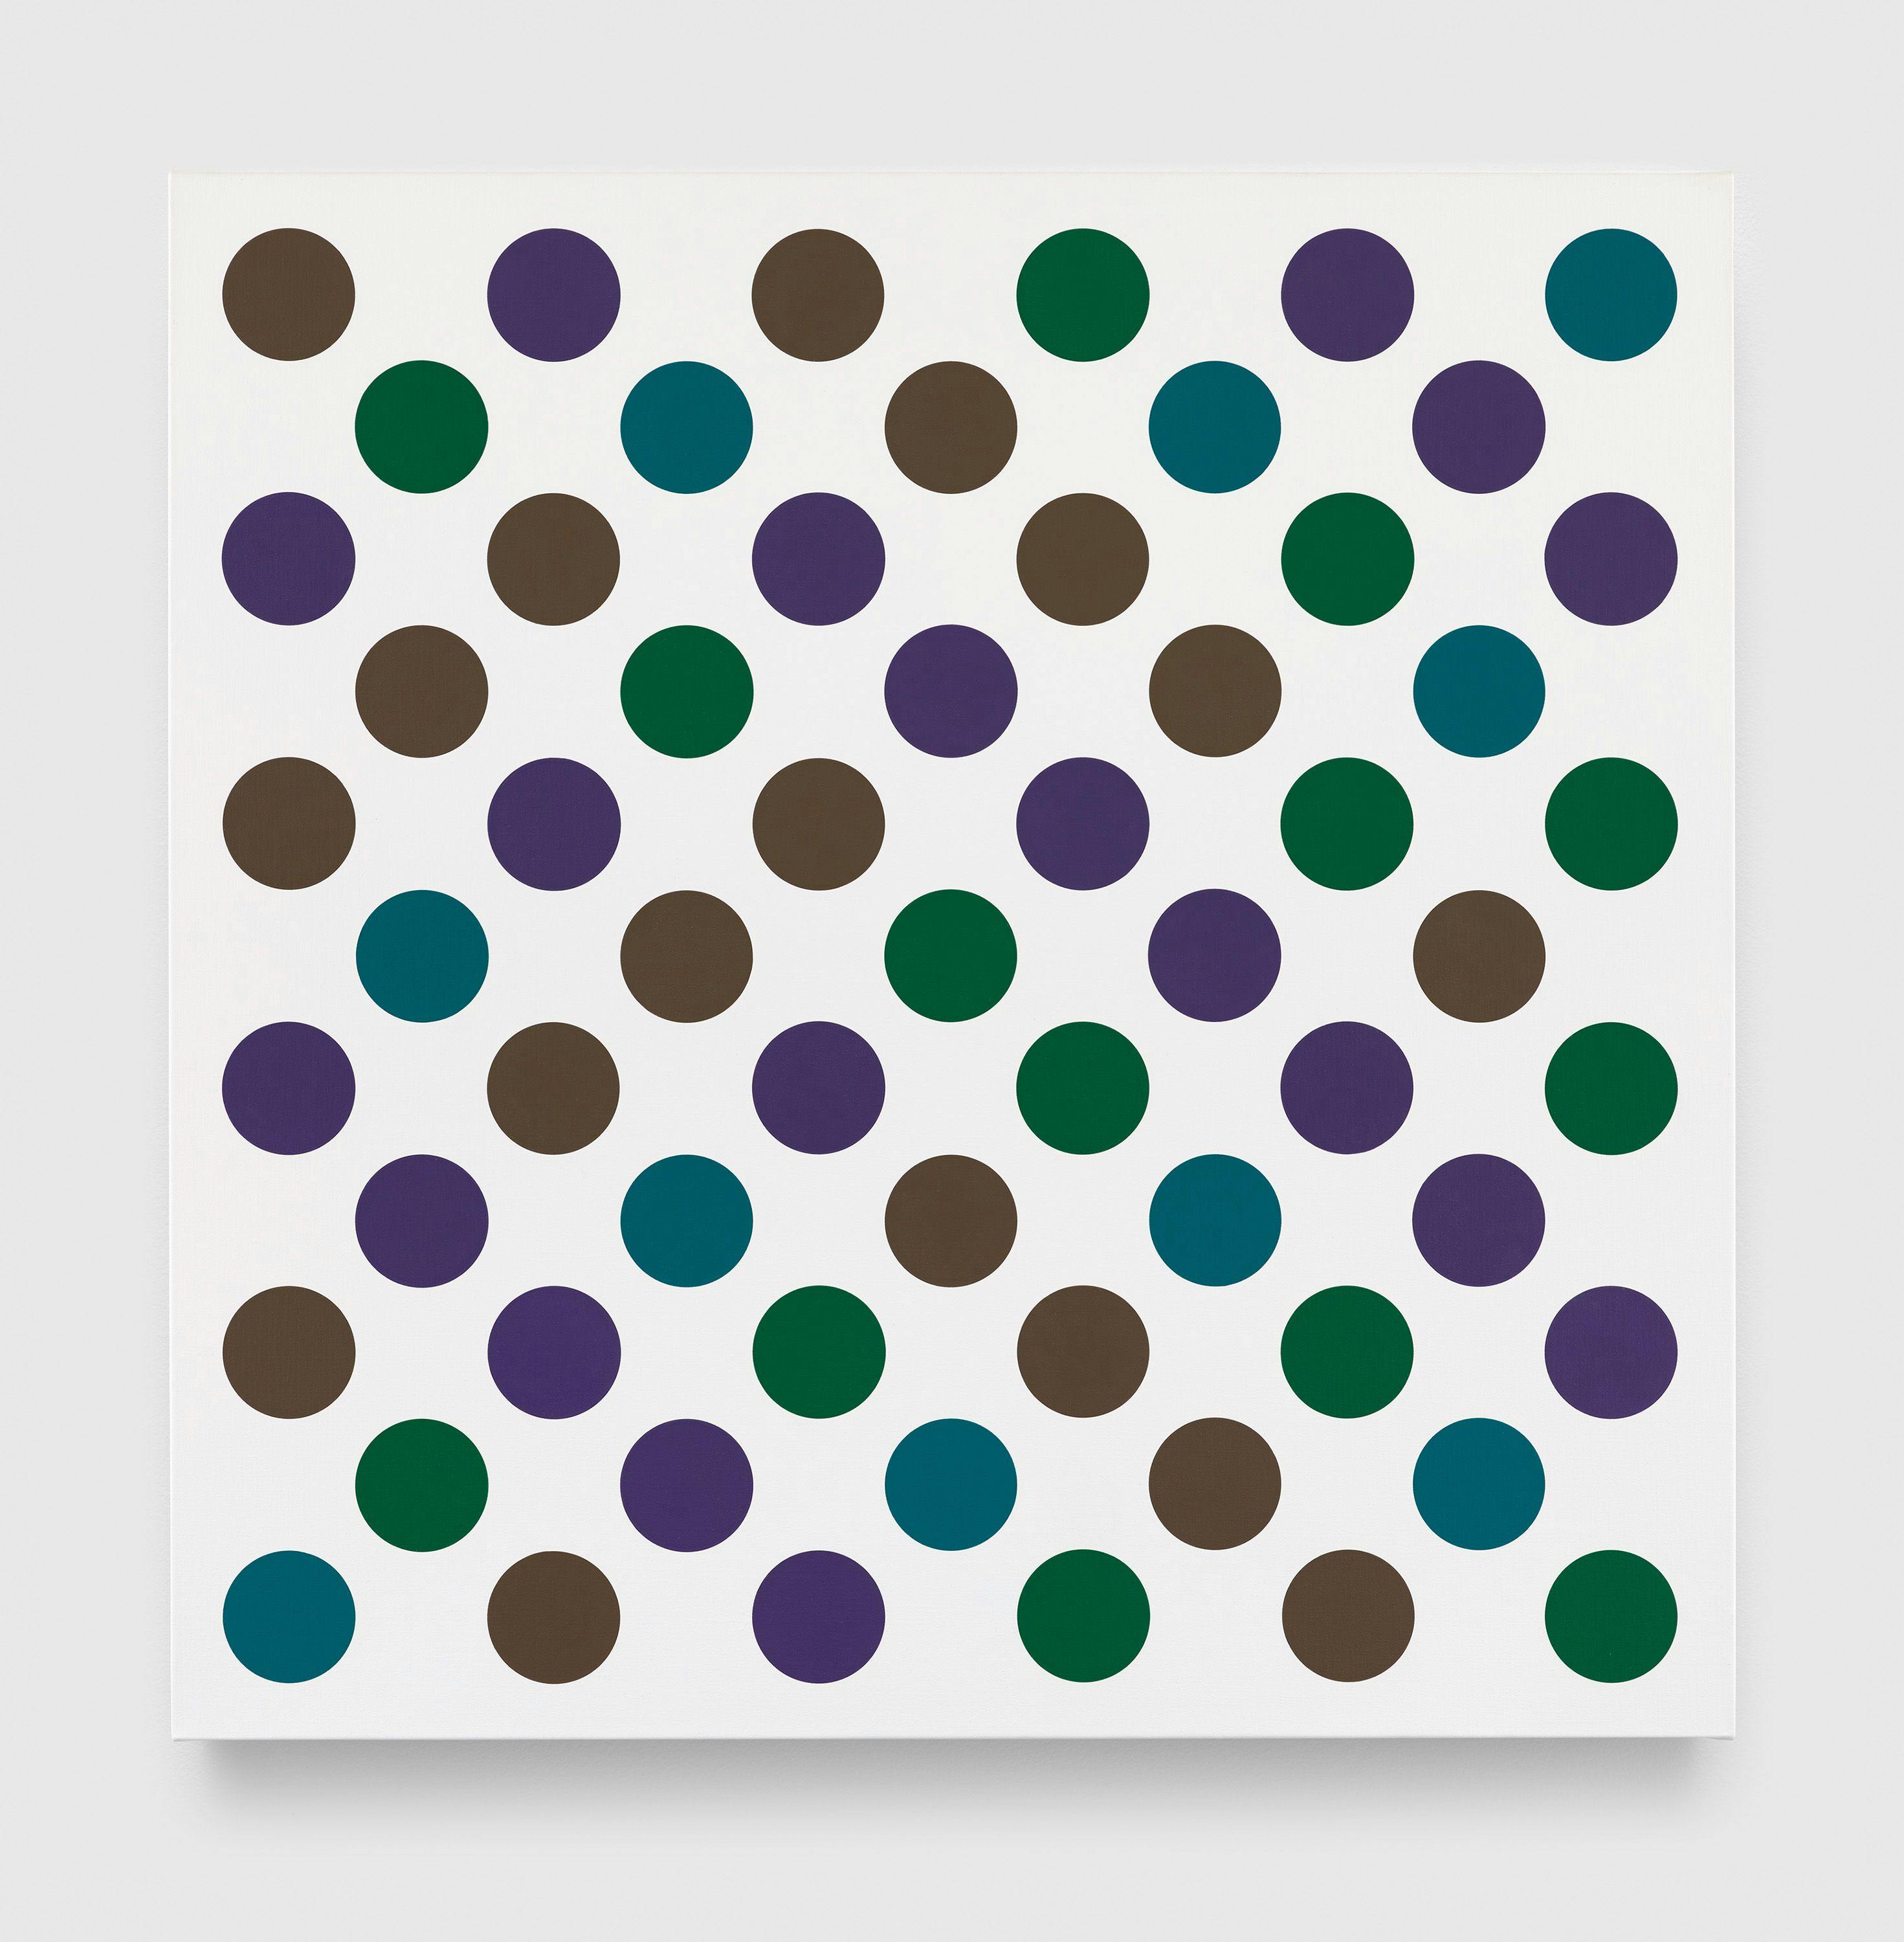 A painting by Bridget Riley, titled Measure for Measure Dark with Turquoise 6, dated 2021.